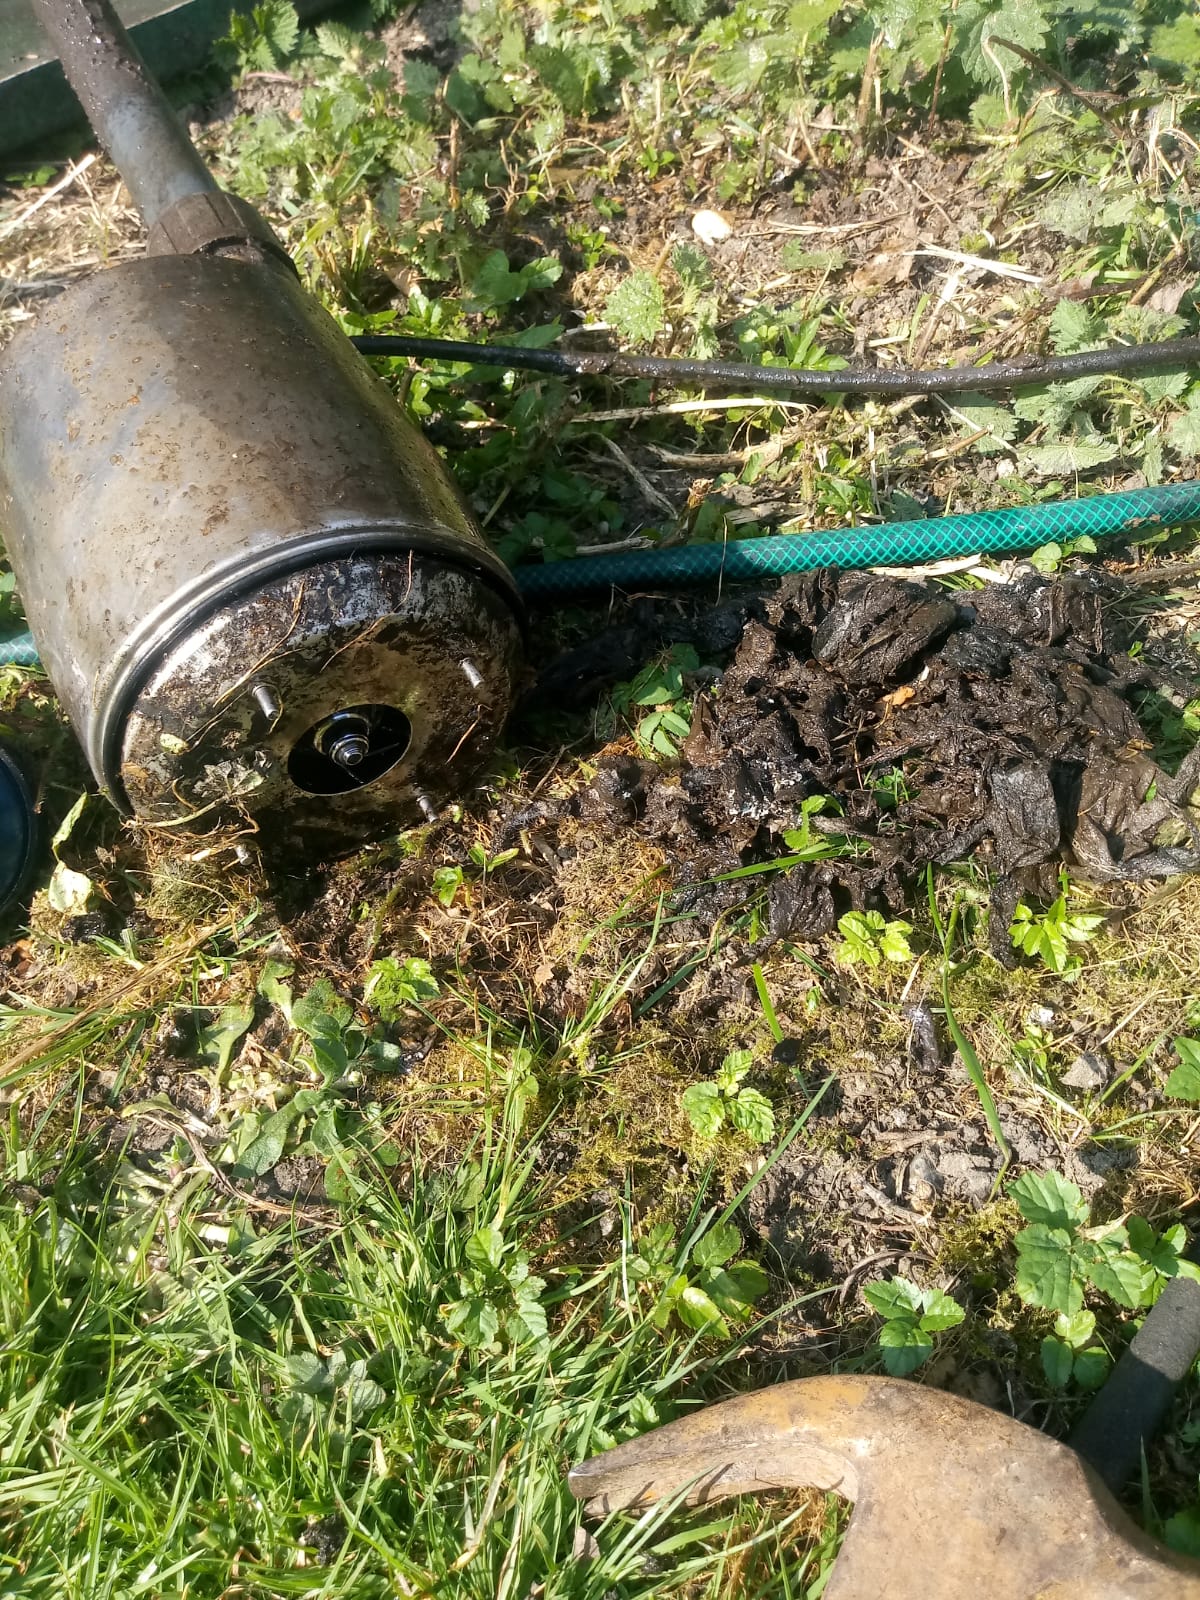 Blockage removed from a pipe, fixed septic tank problems